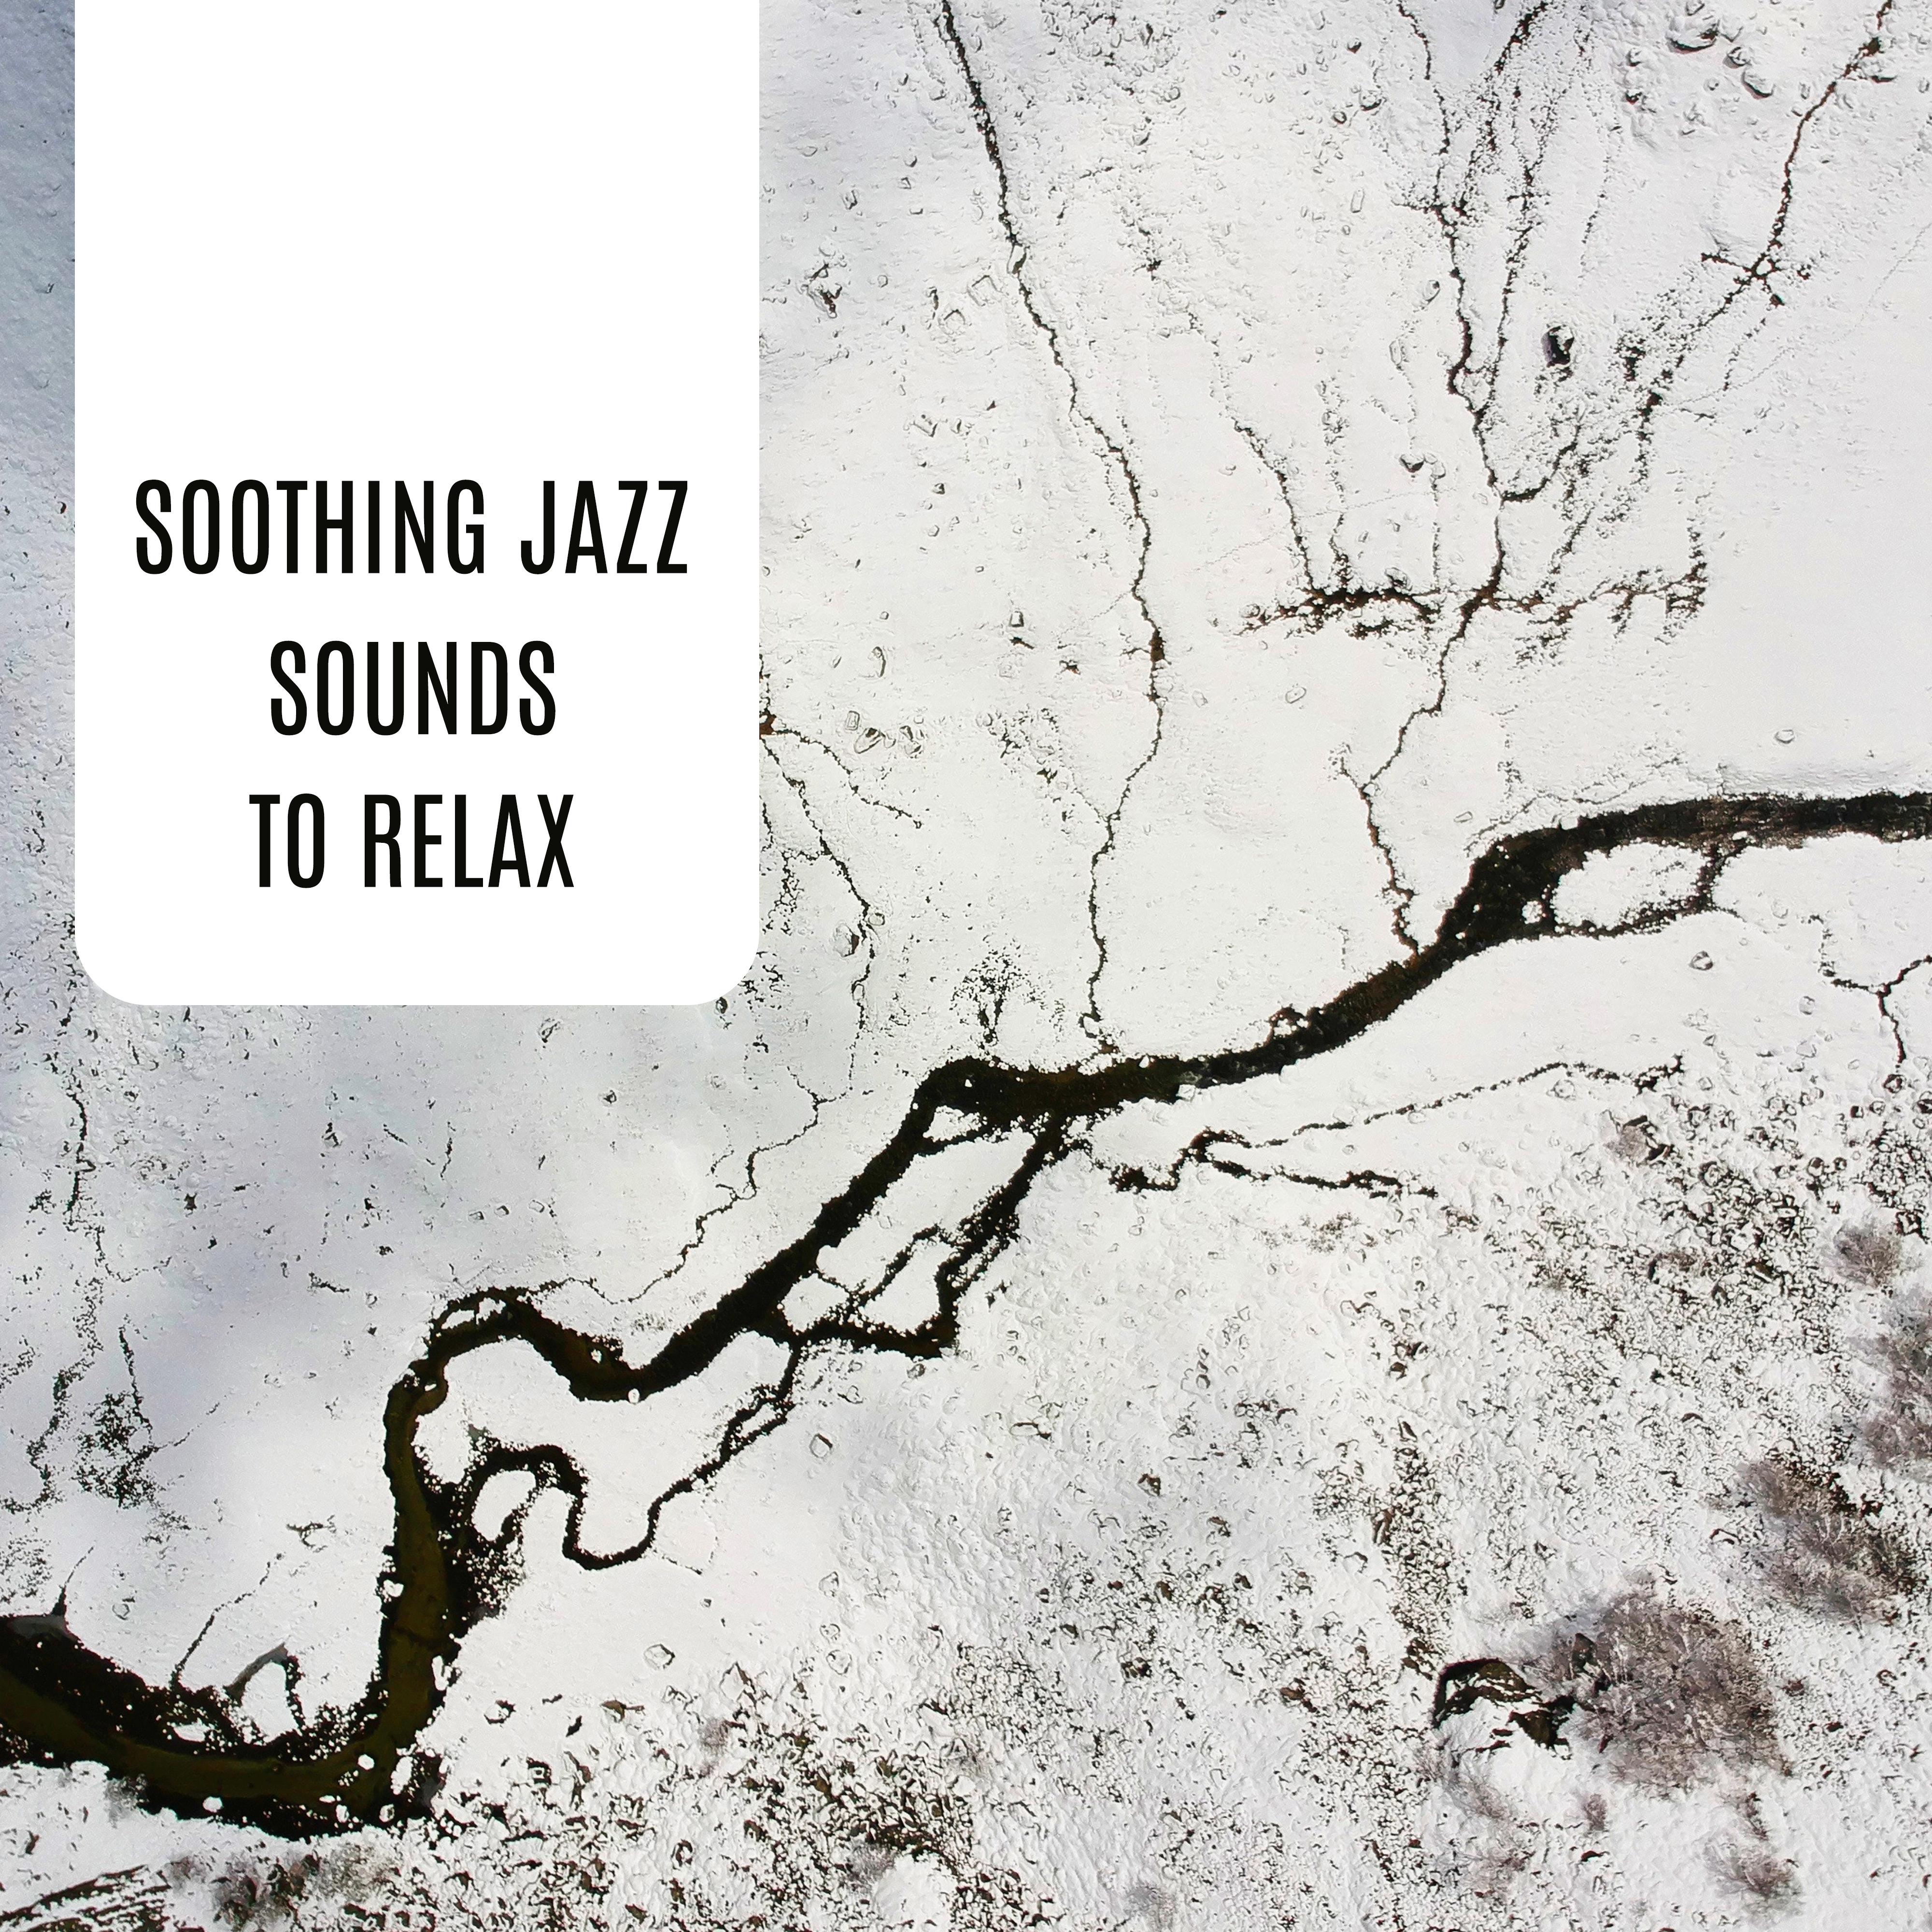 Soothing Jazz Sounds to Relax